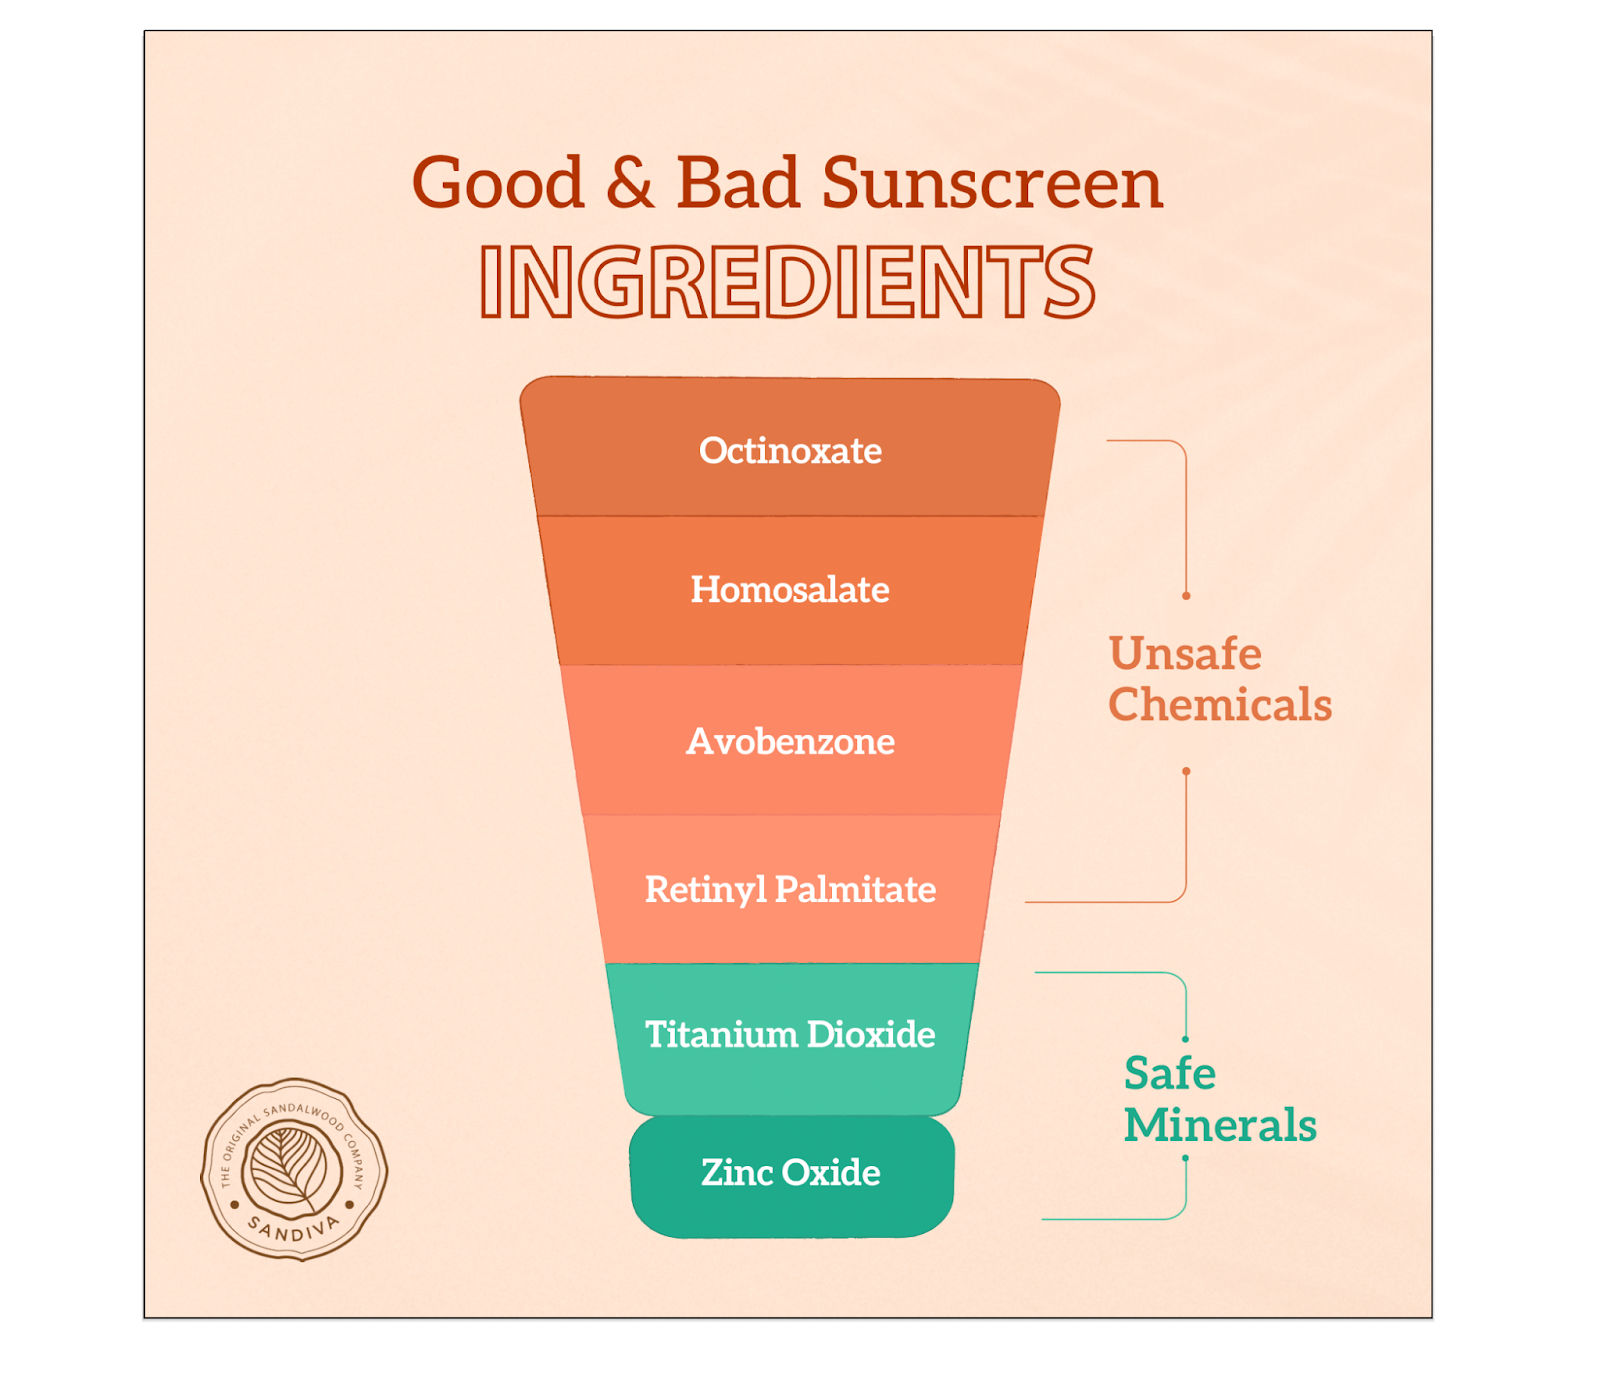  What Are the Good & Bad Sunscreen Ingredients?